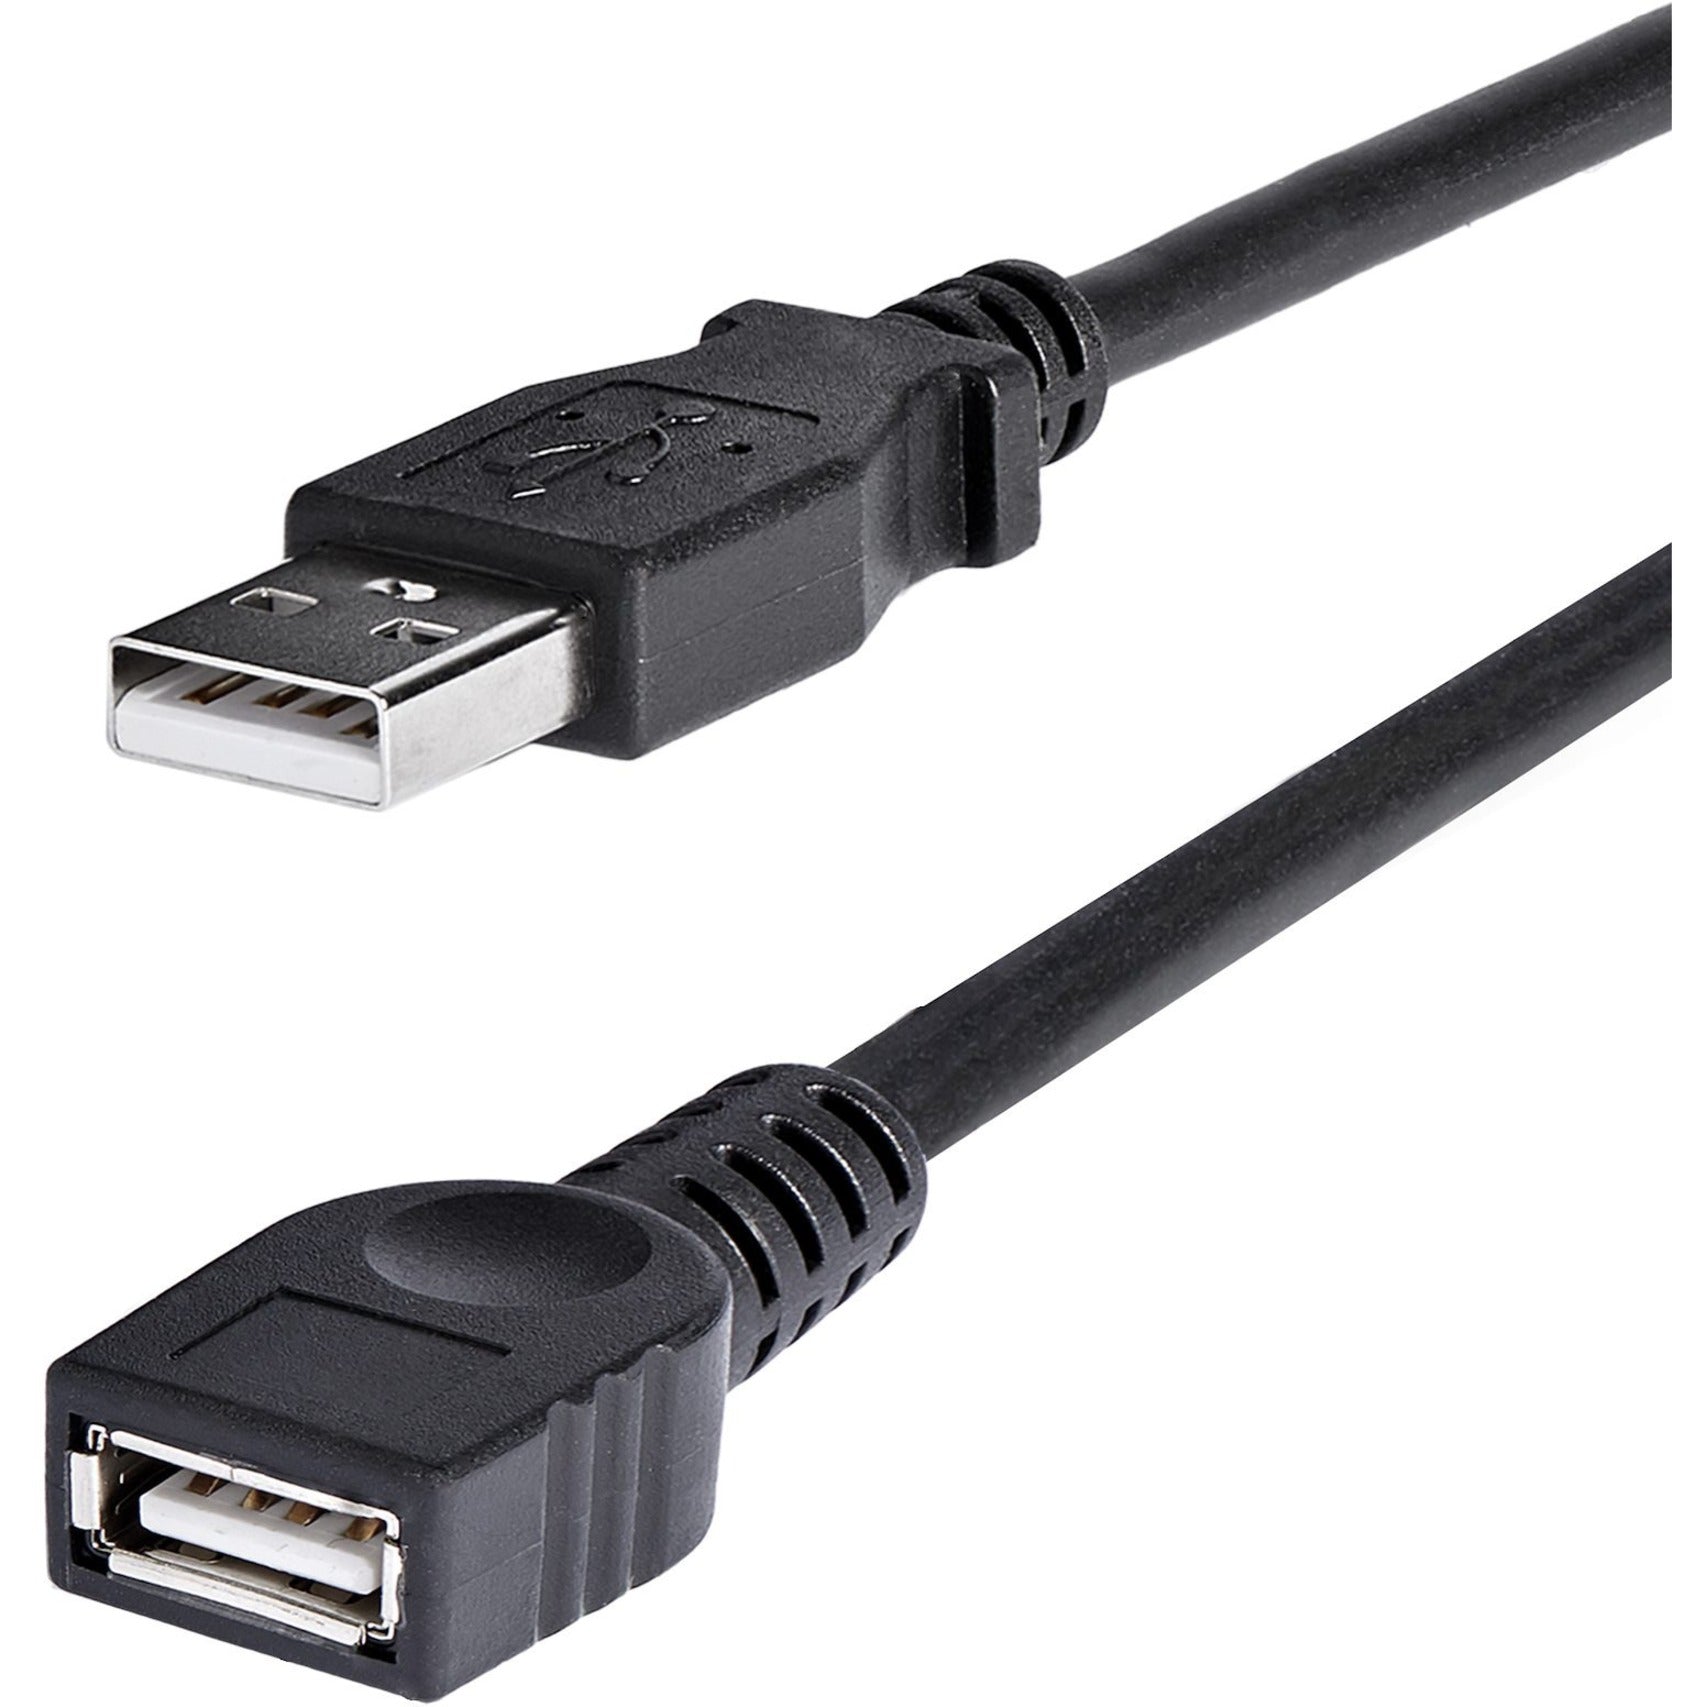 StarTech.com USBEXTAA6BK 6 ft Black USB 2.0 Extension Cable A to A - M/F Flexible and Molded Data Transfer Cable  スタートテック  ドットコム USBEXTAA6BK 6 フィート ブラック USB 2.0 エクステンション ケーブル A to A - M/F、柔軟で成形された データ 転送 ケーブル